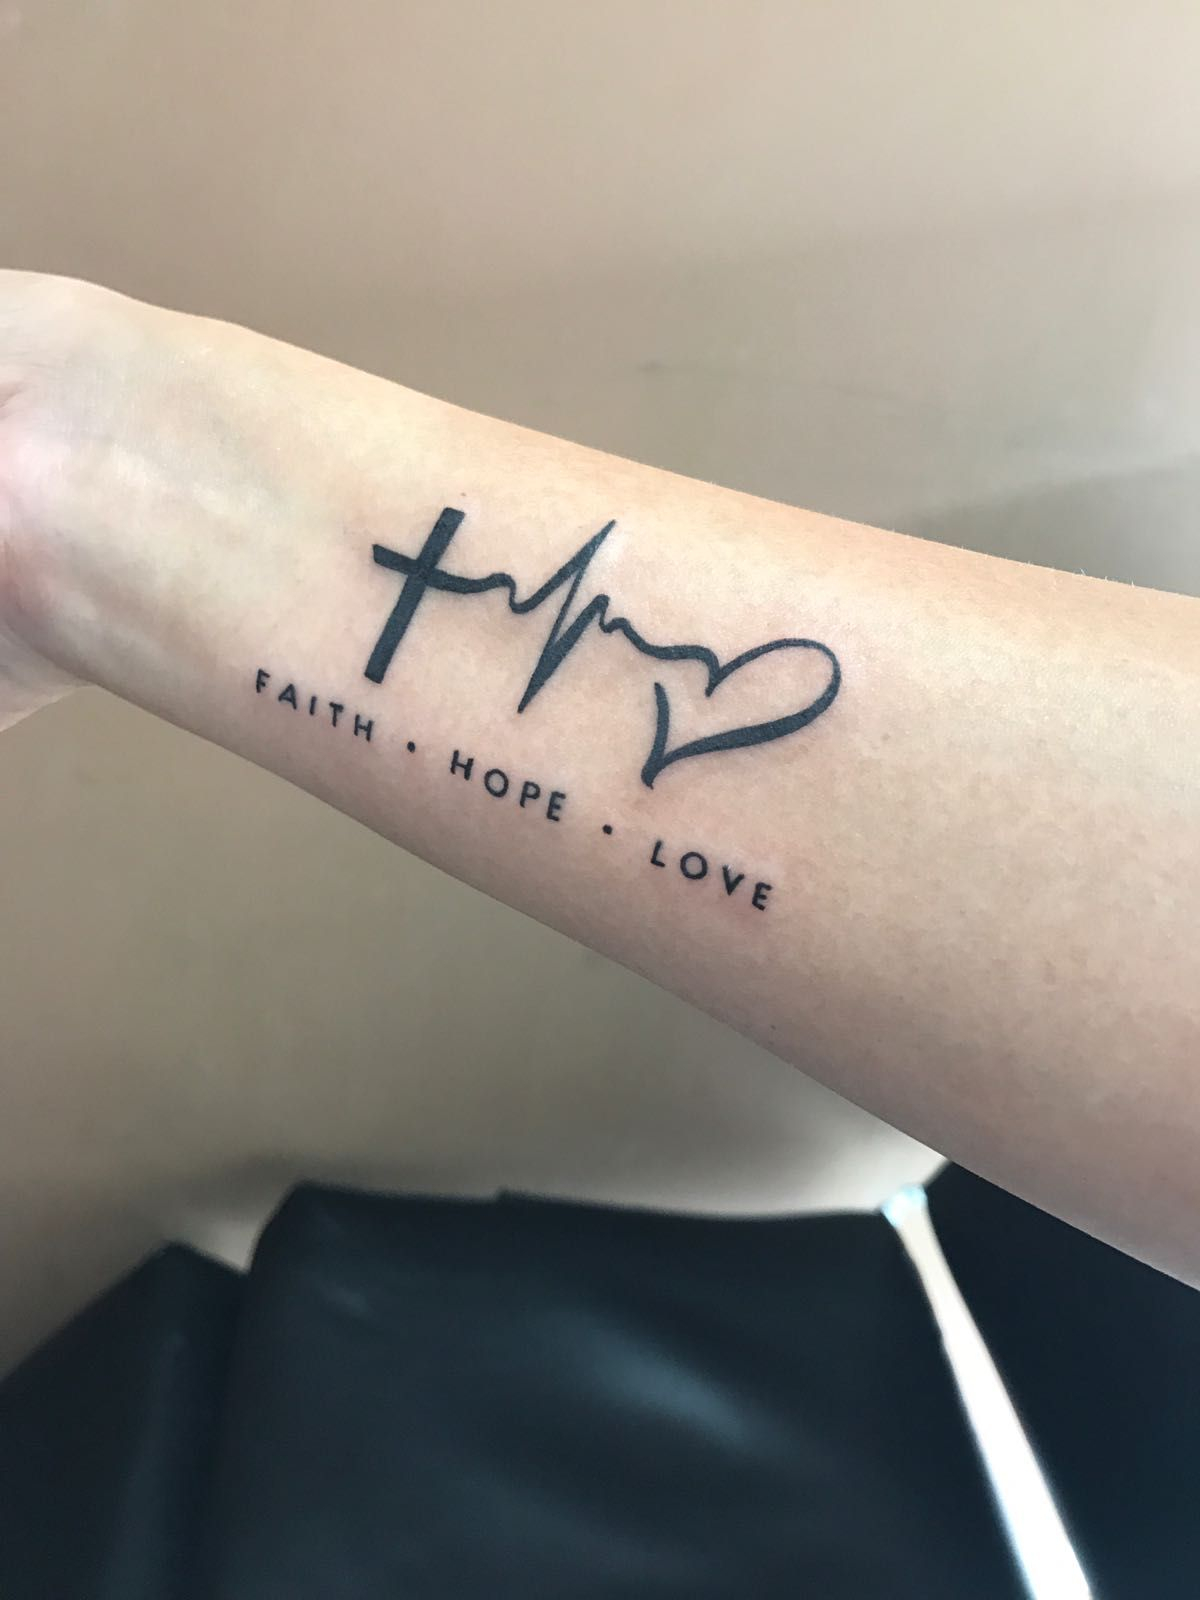 Ecg Tattoo Faith Hope Love Heartbeat Tattoofor Further within proportions 1200 X 1600